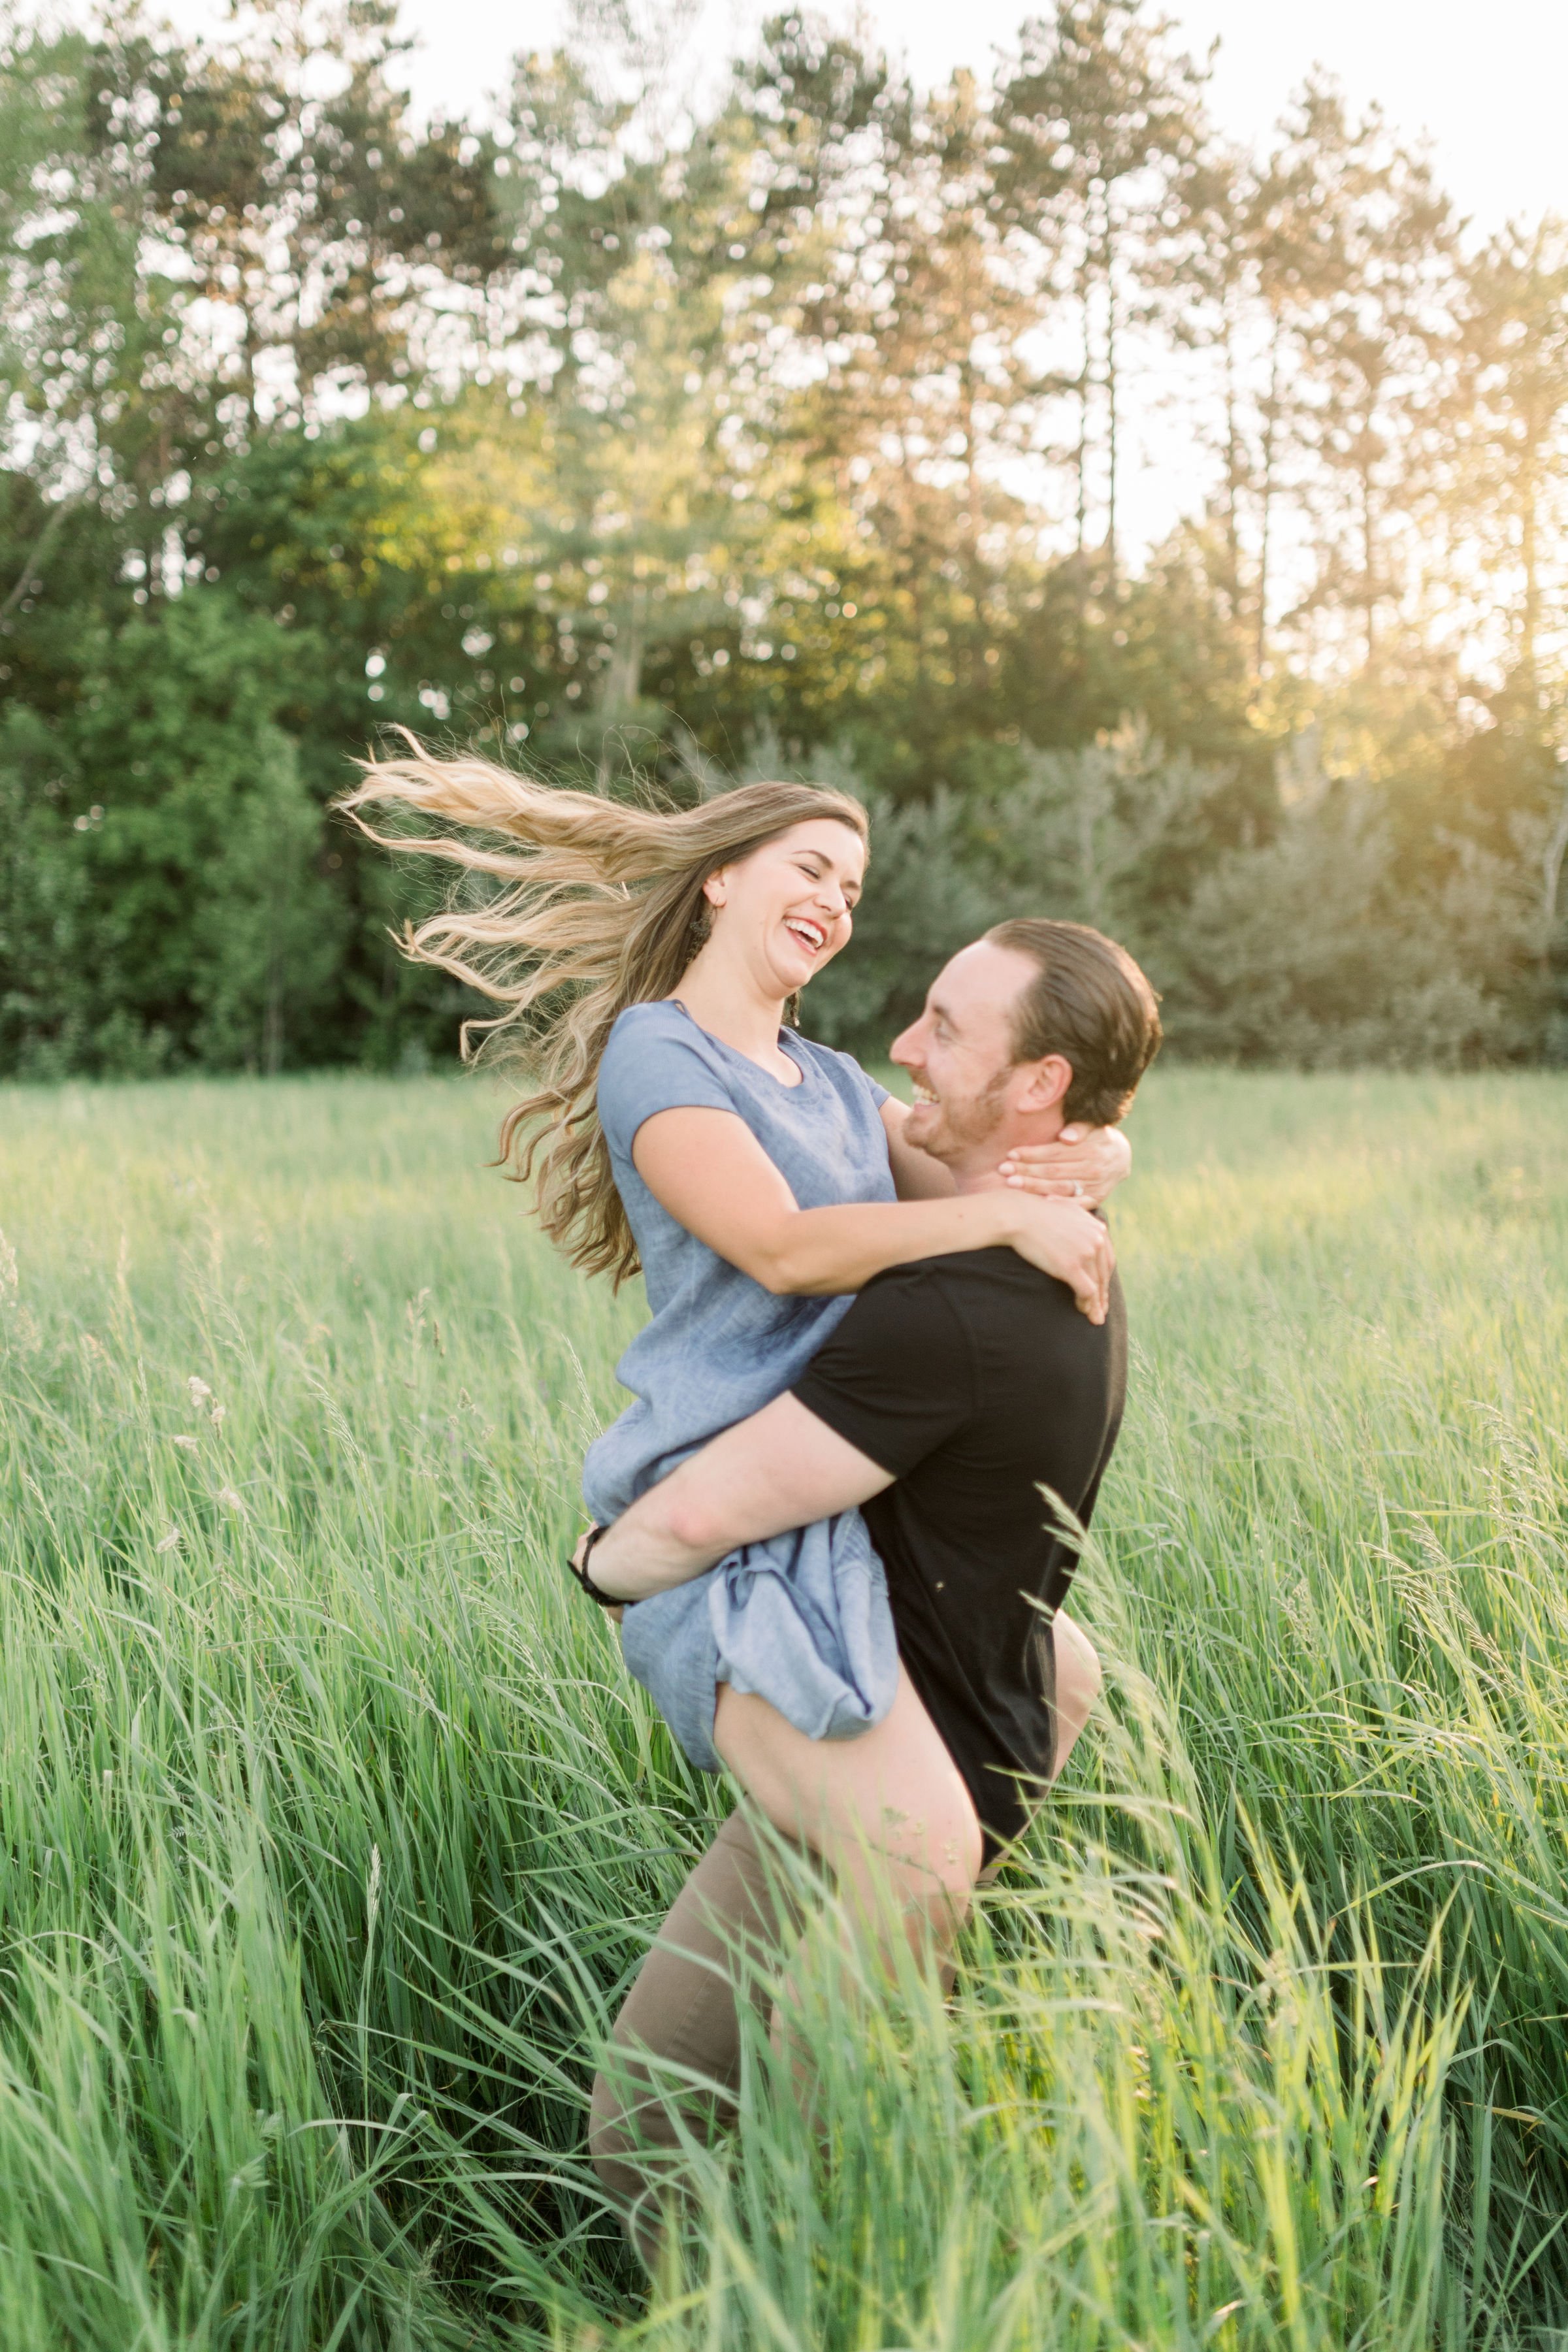  With his fiance in his arms, a man twirls her around captured by Chelsea Mason Photography in Almonte. twirling in a field #chelseamasonphotography #chelseamasonengagements #Ottawaengagments #Almonteengagementphotographer #outdoorengagments 